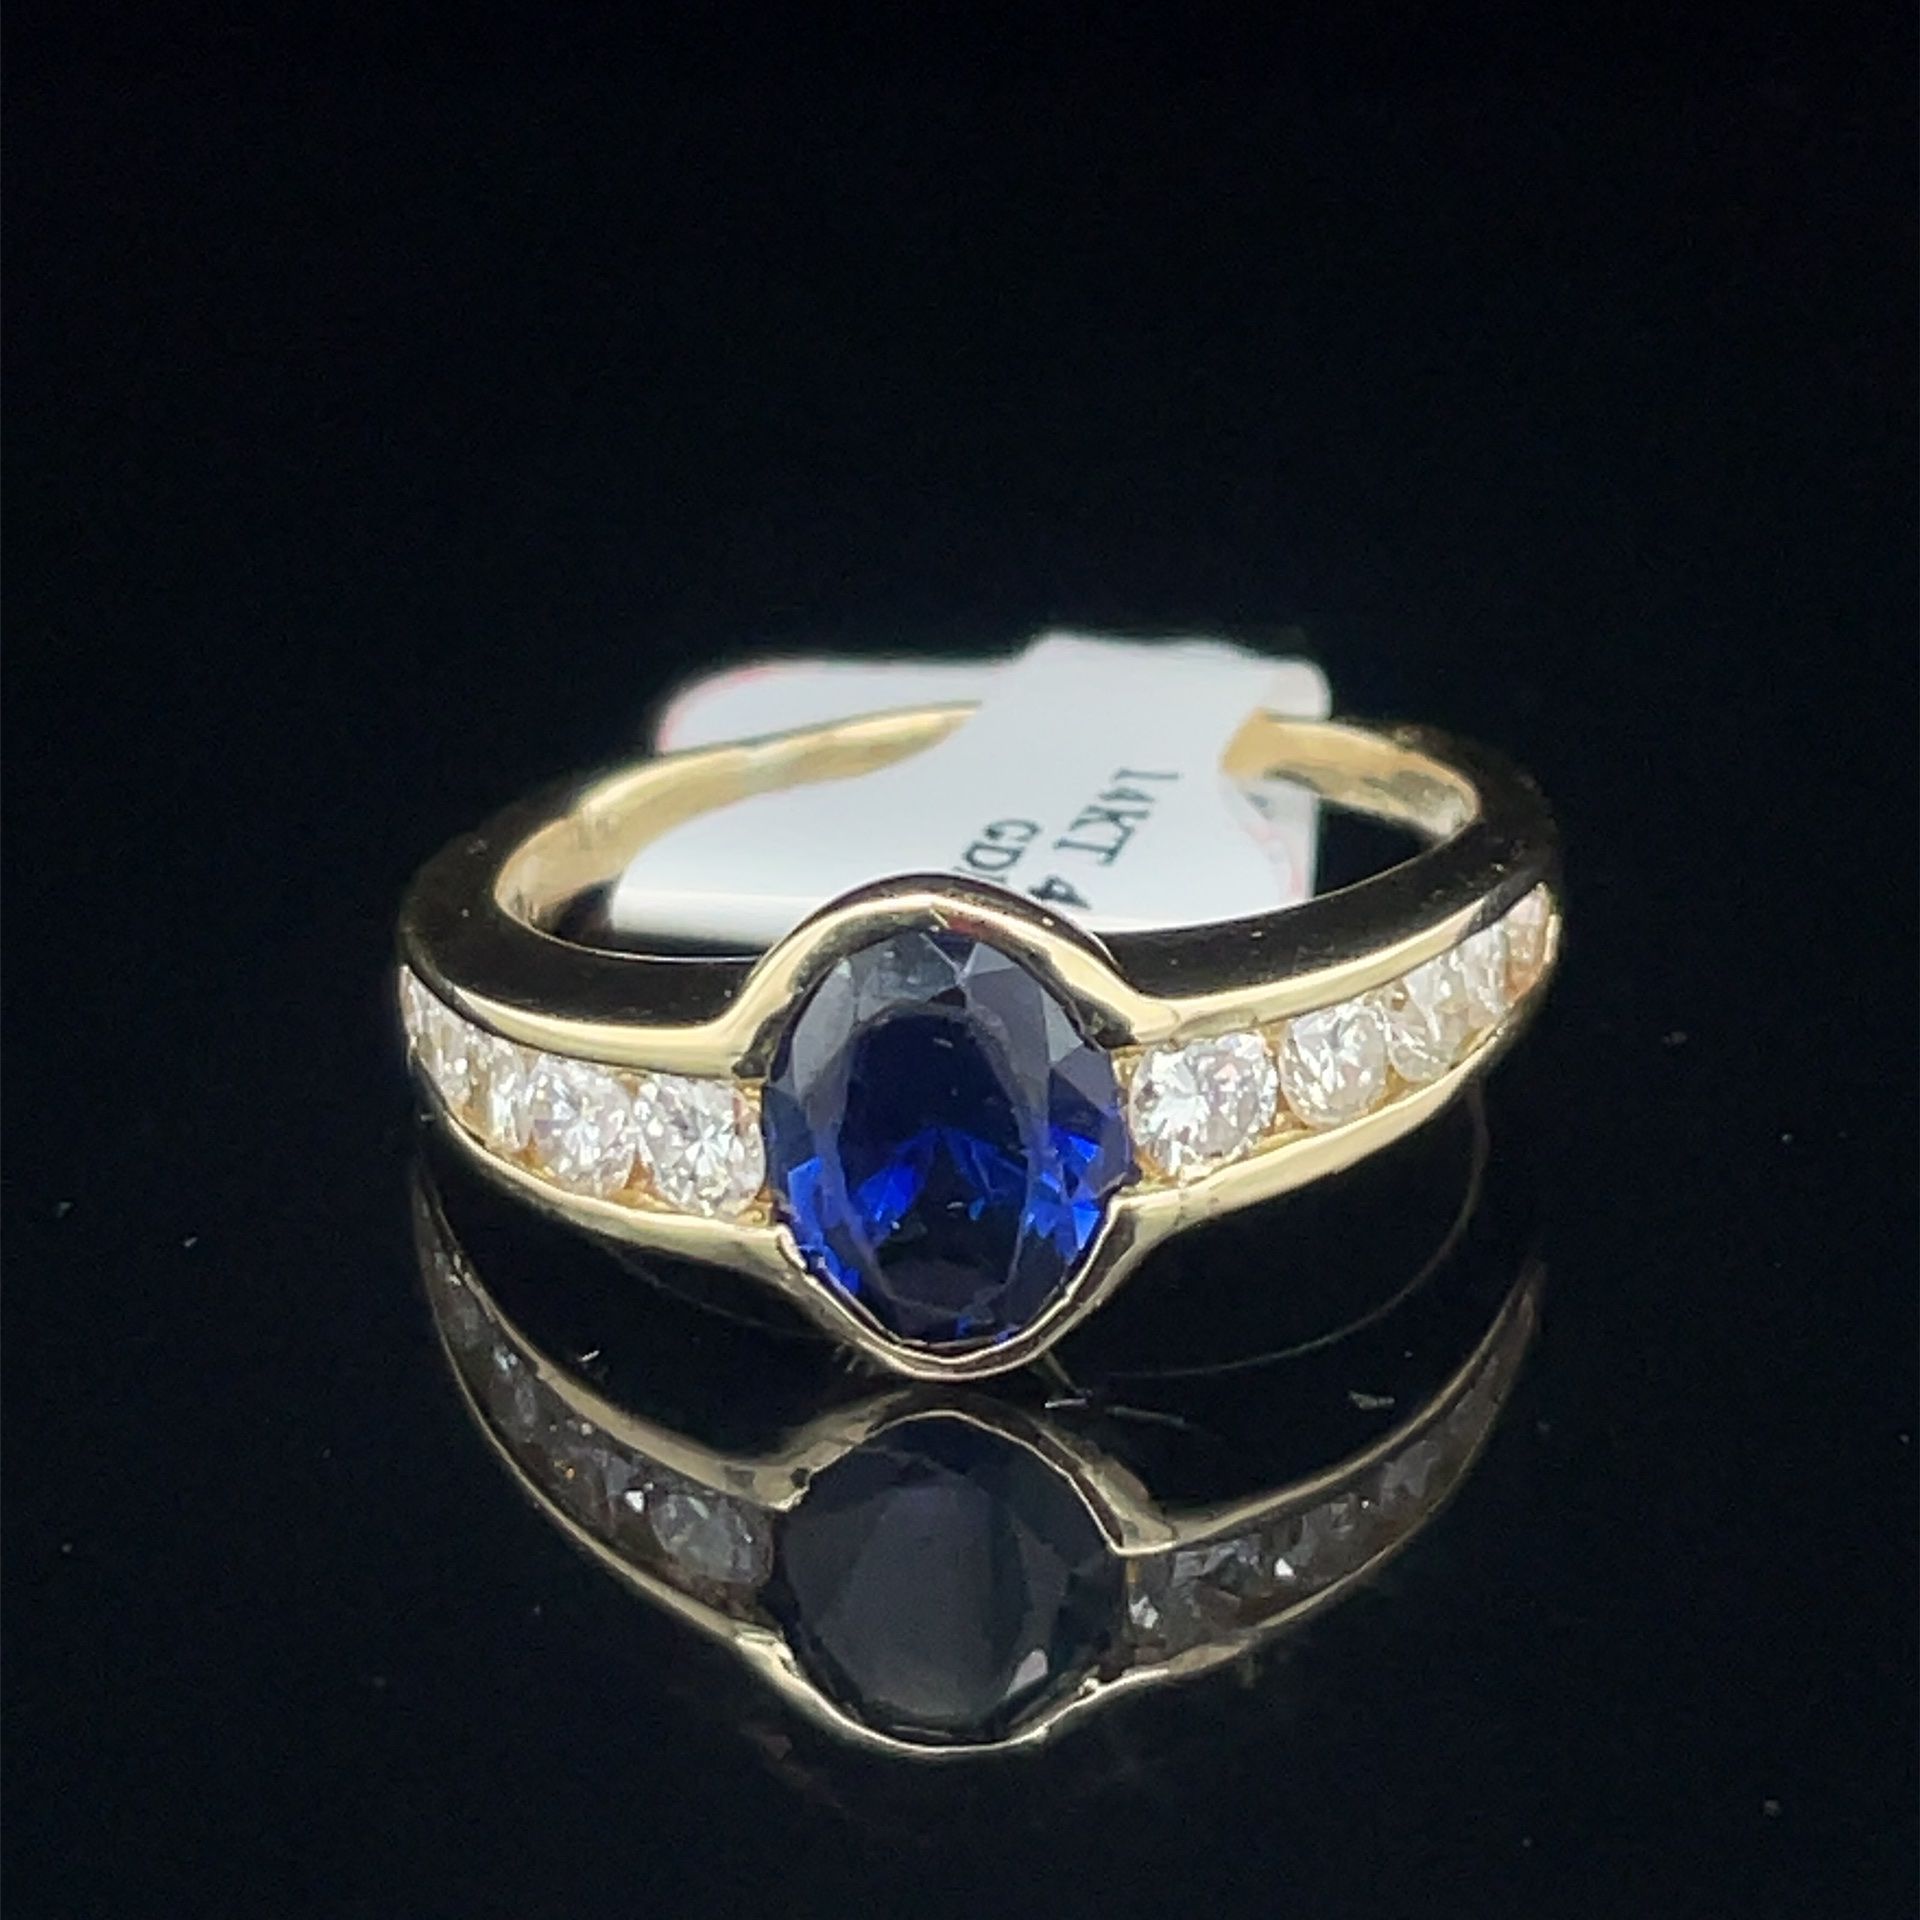 14KT Yellow Gold Oval Sapphire Diamond Ring 4.35g Size 7 I-903